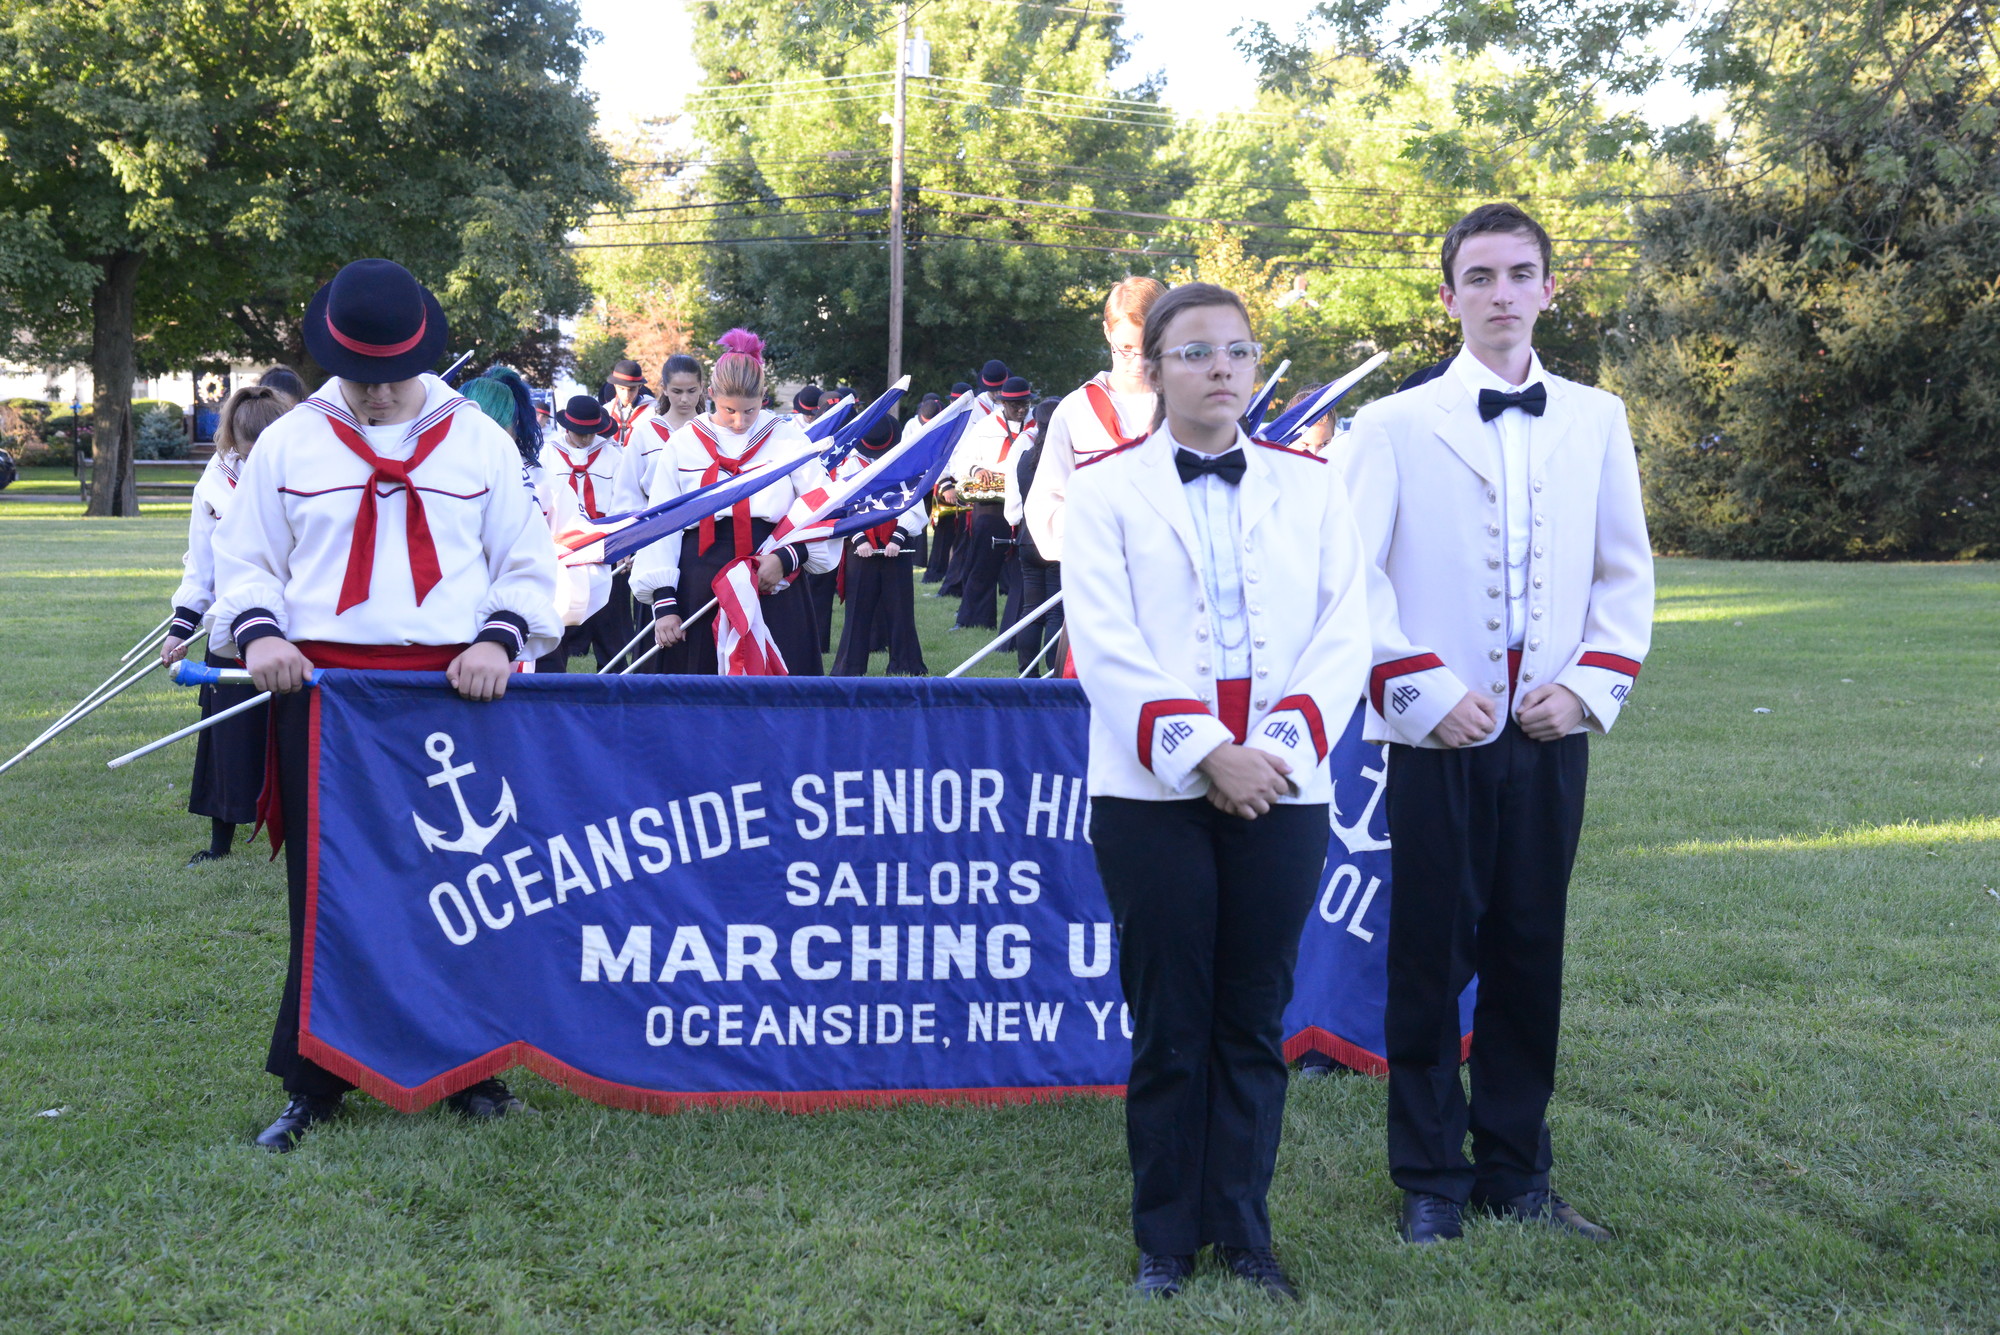 The OHS marching band, directed by Michael Vetter, stood at attention.